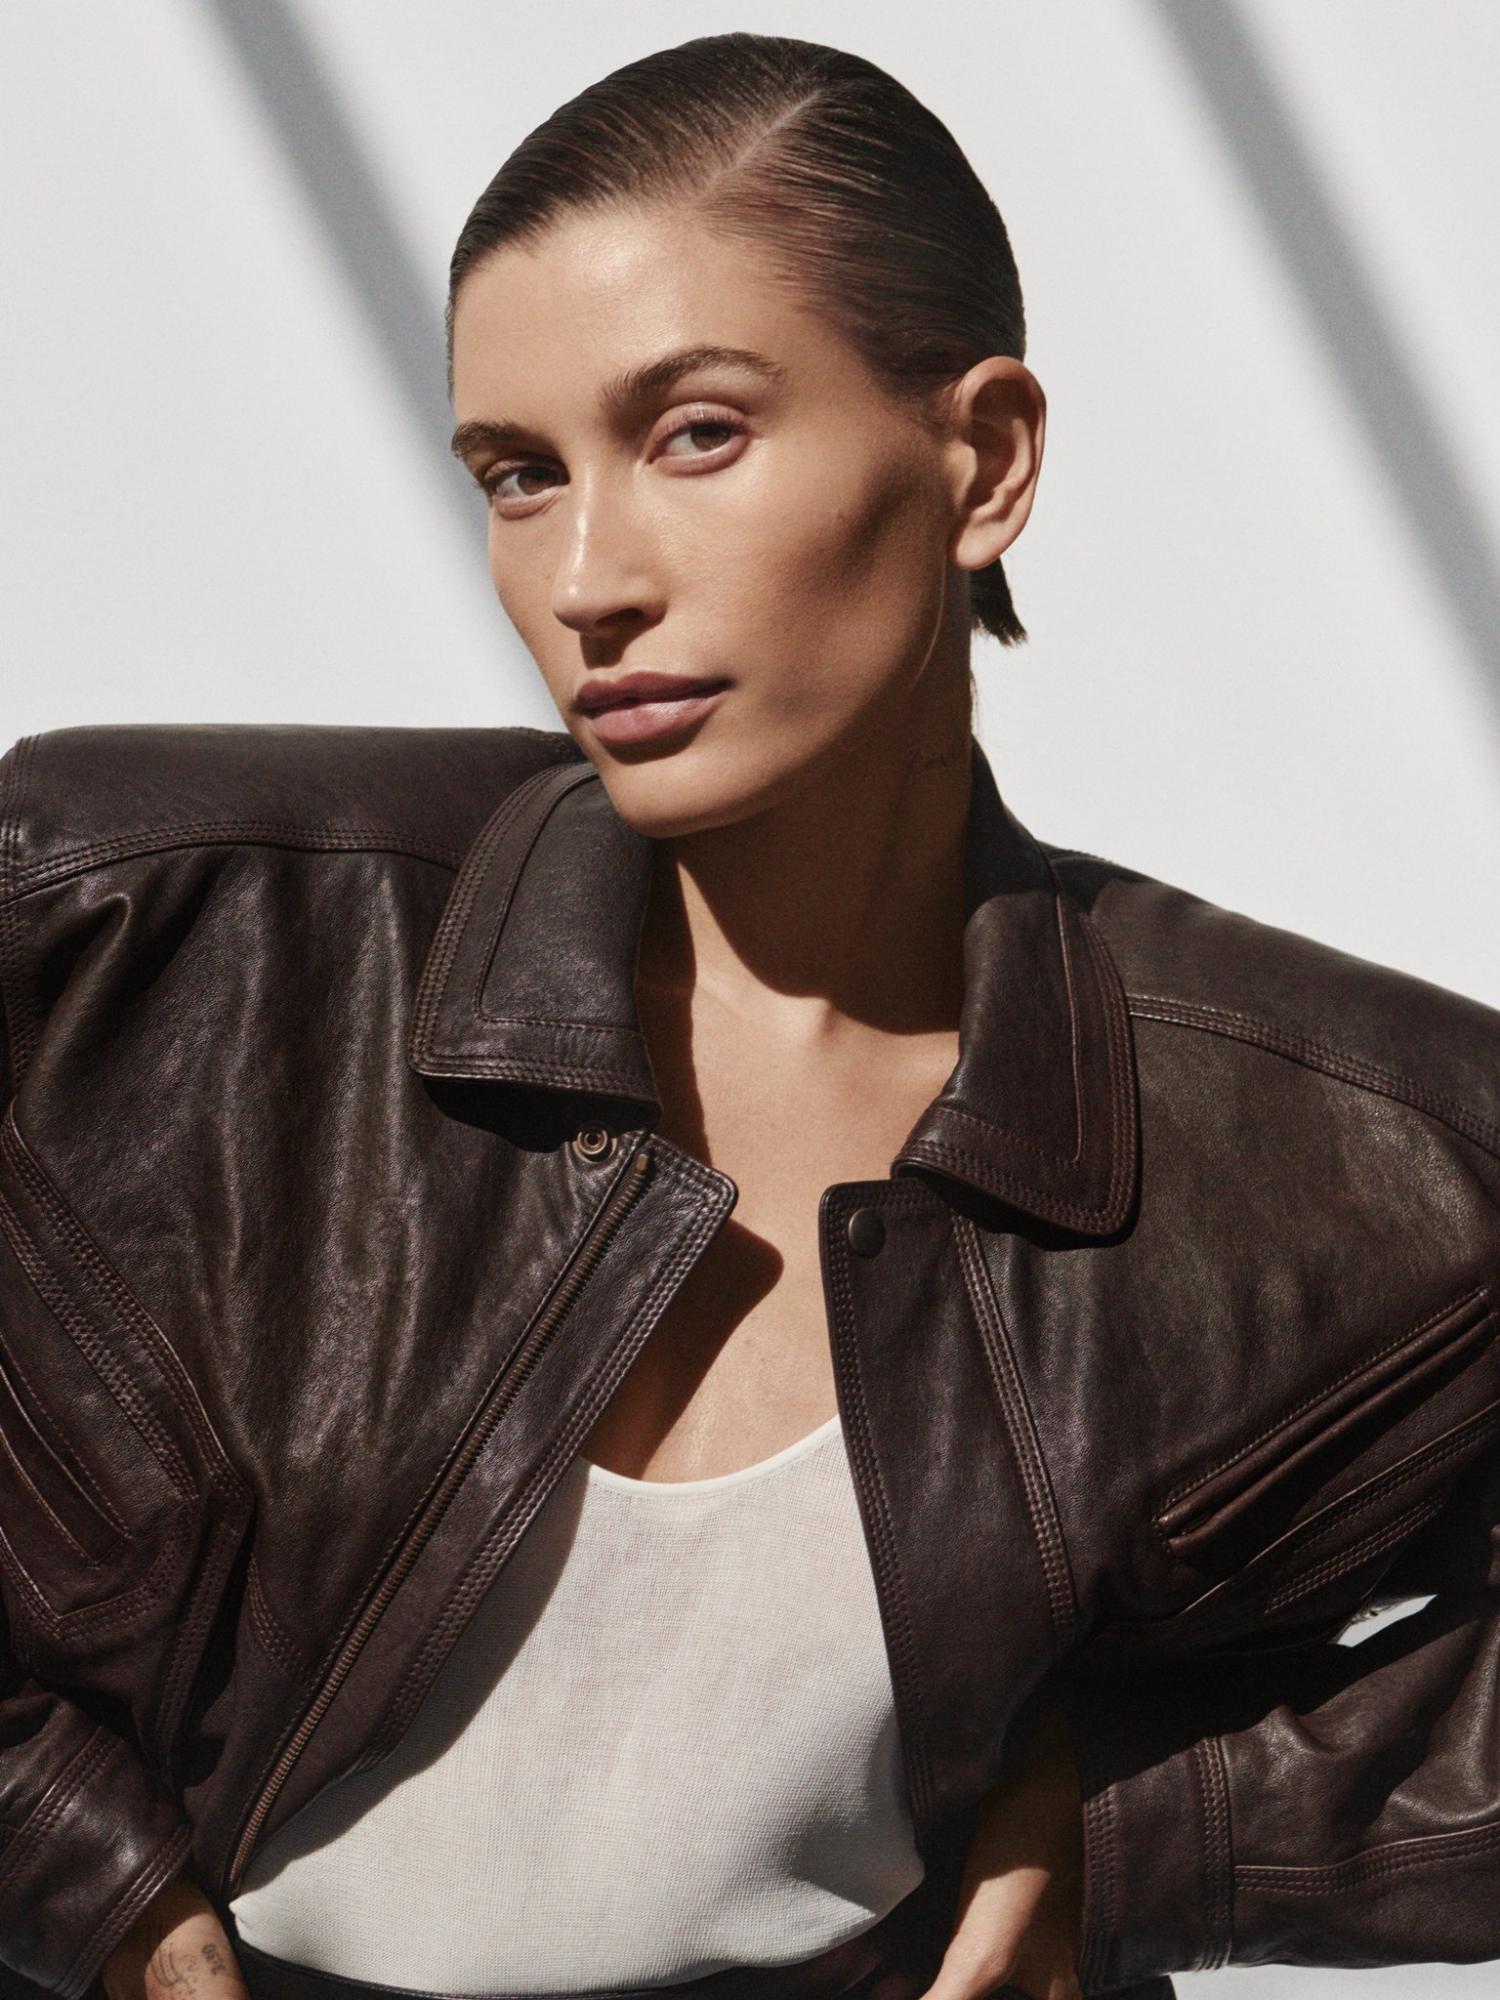 Hailey Bieber in Saint Laurent Leather Bomber Jacket by Cass Bird for The Sunday Times Style Magazine UK May 2023